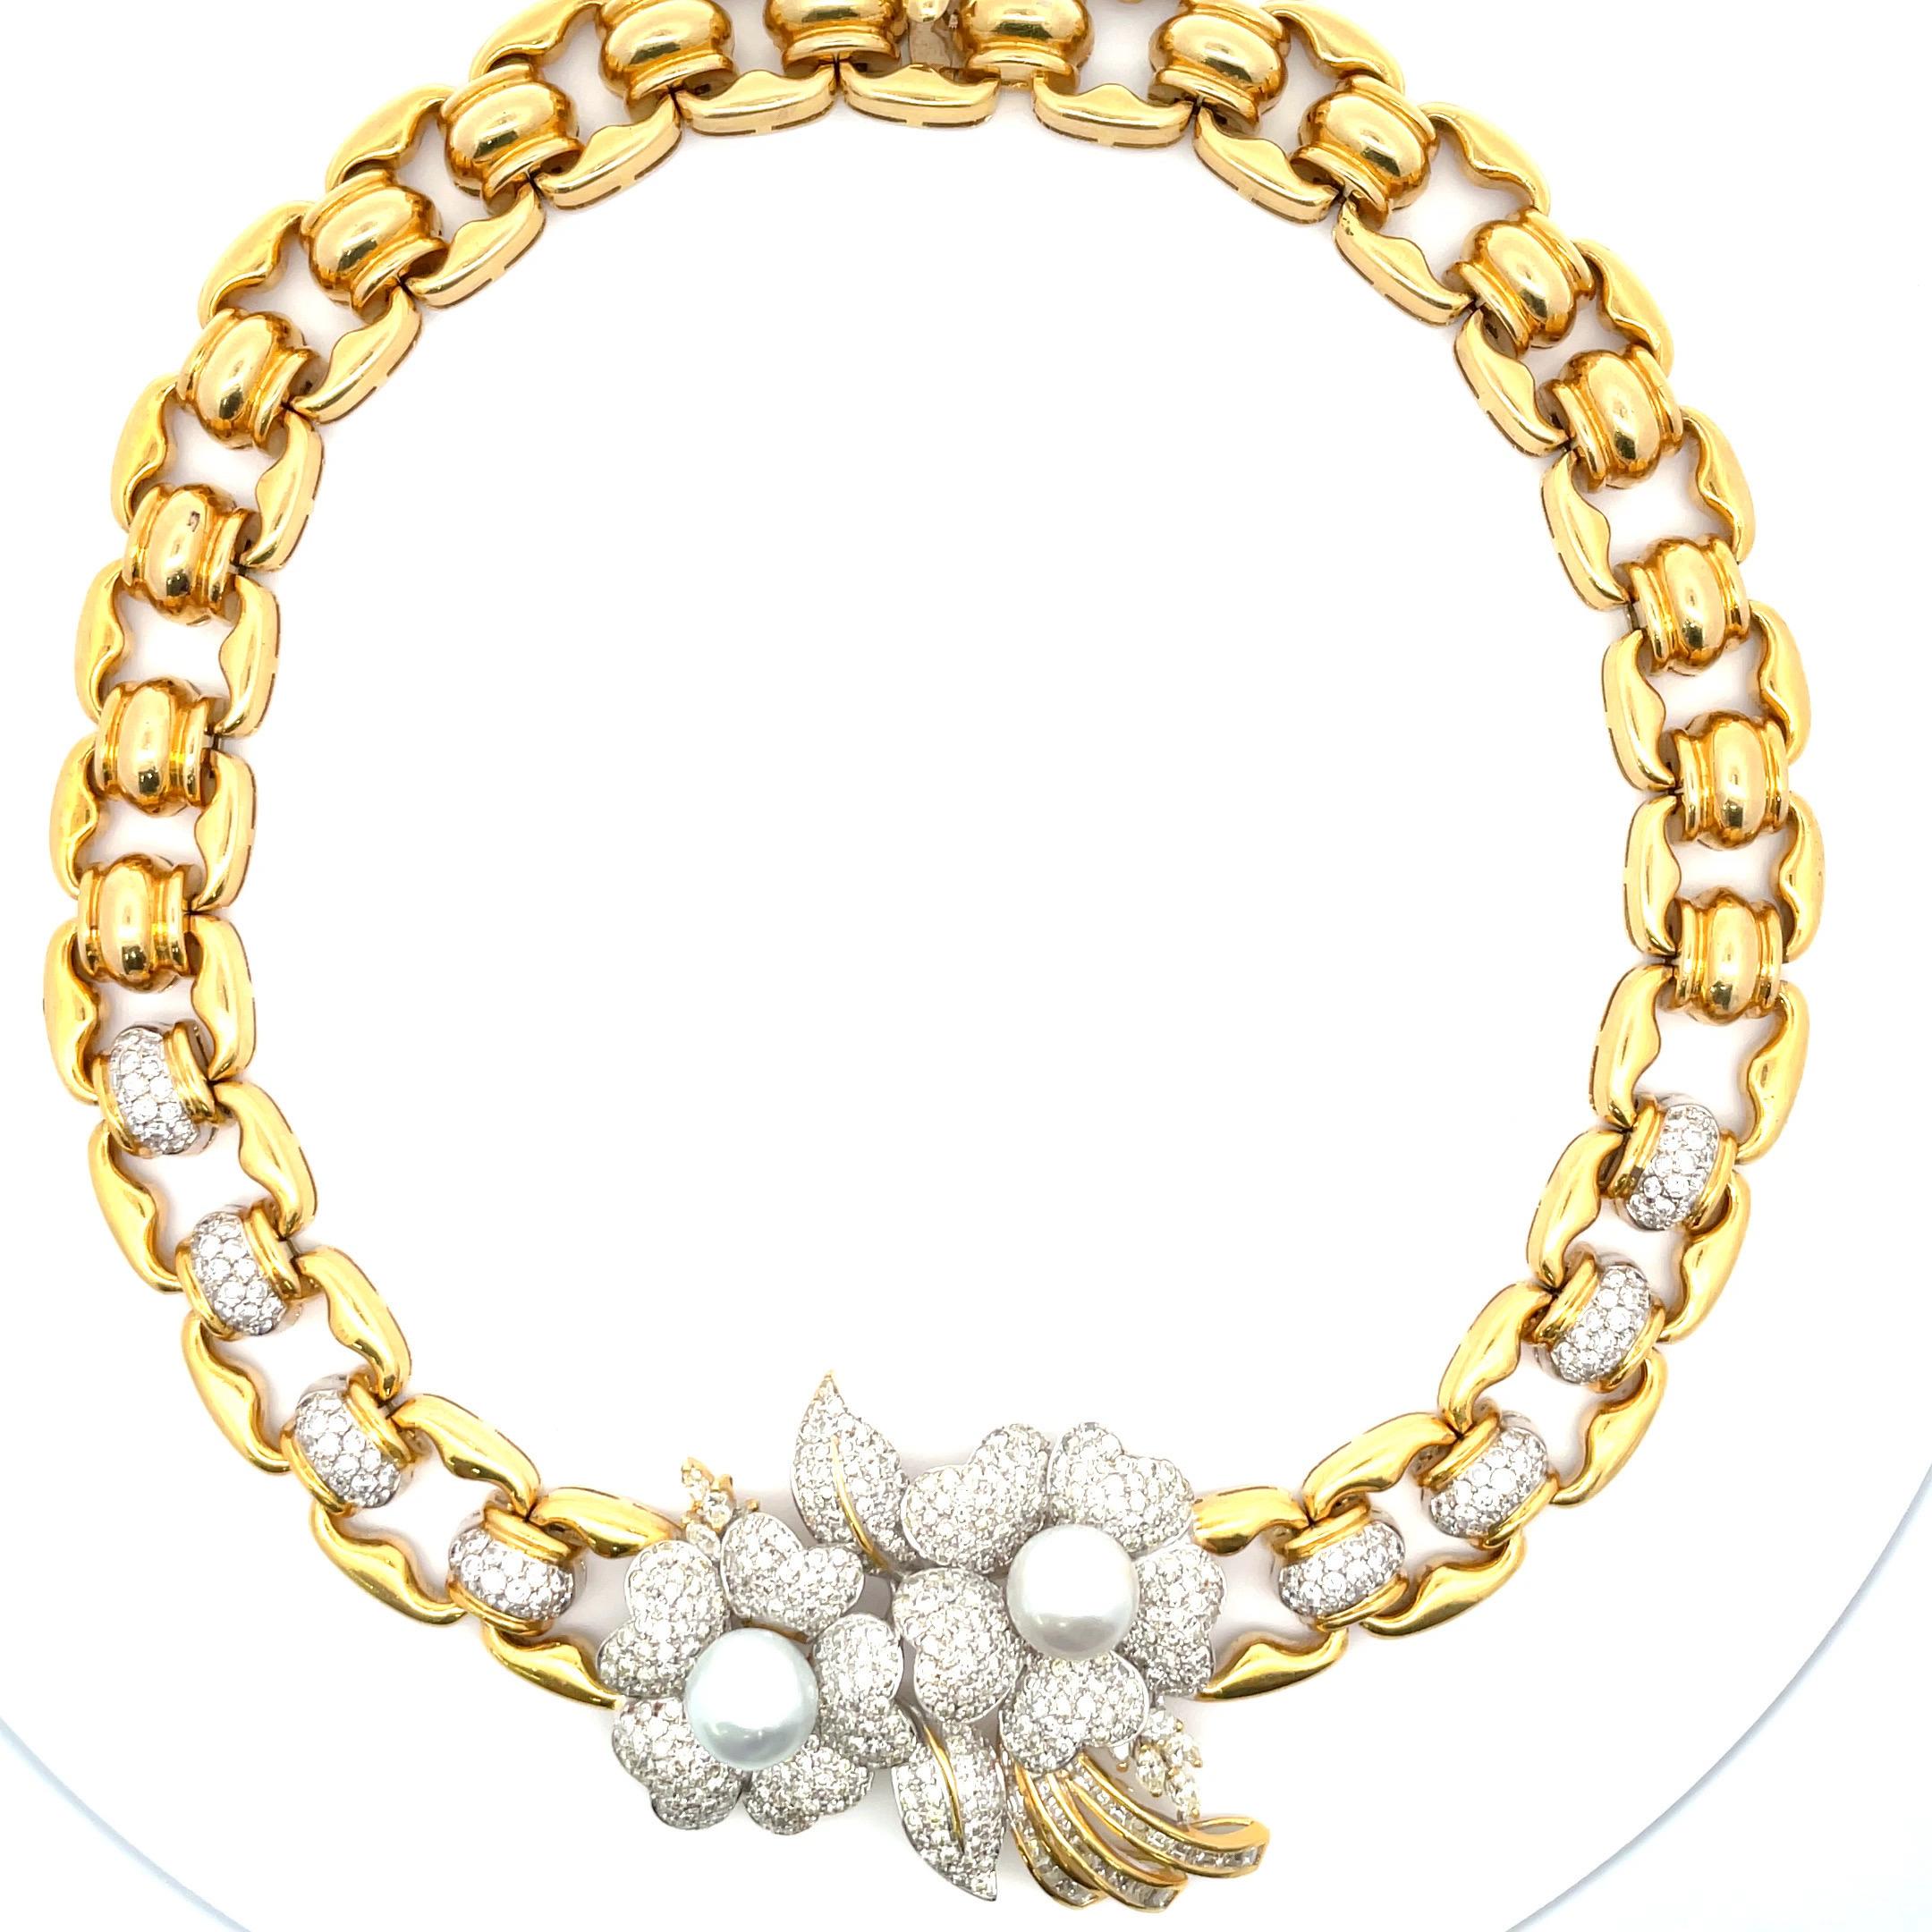 Pearl Floral Diamond Link Necklace 11.50 Carats 18 Karat Yellow Gold For Sale 4